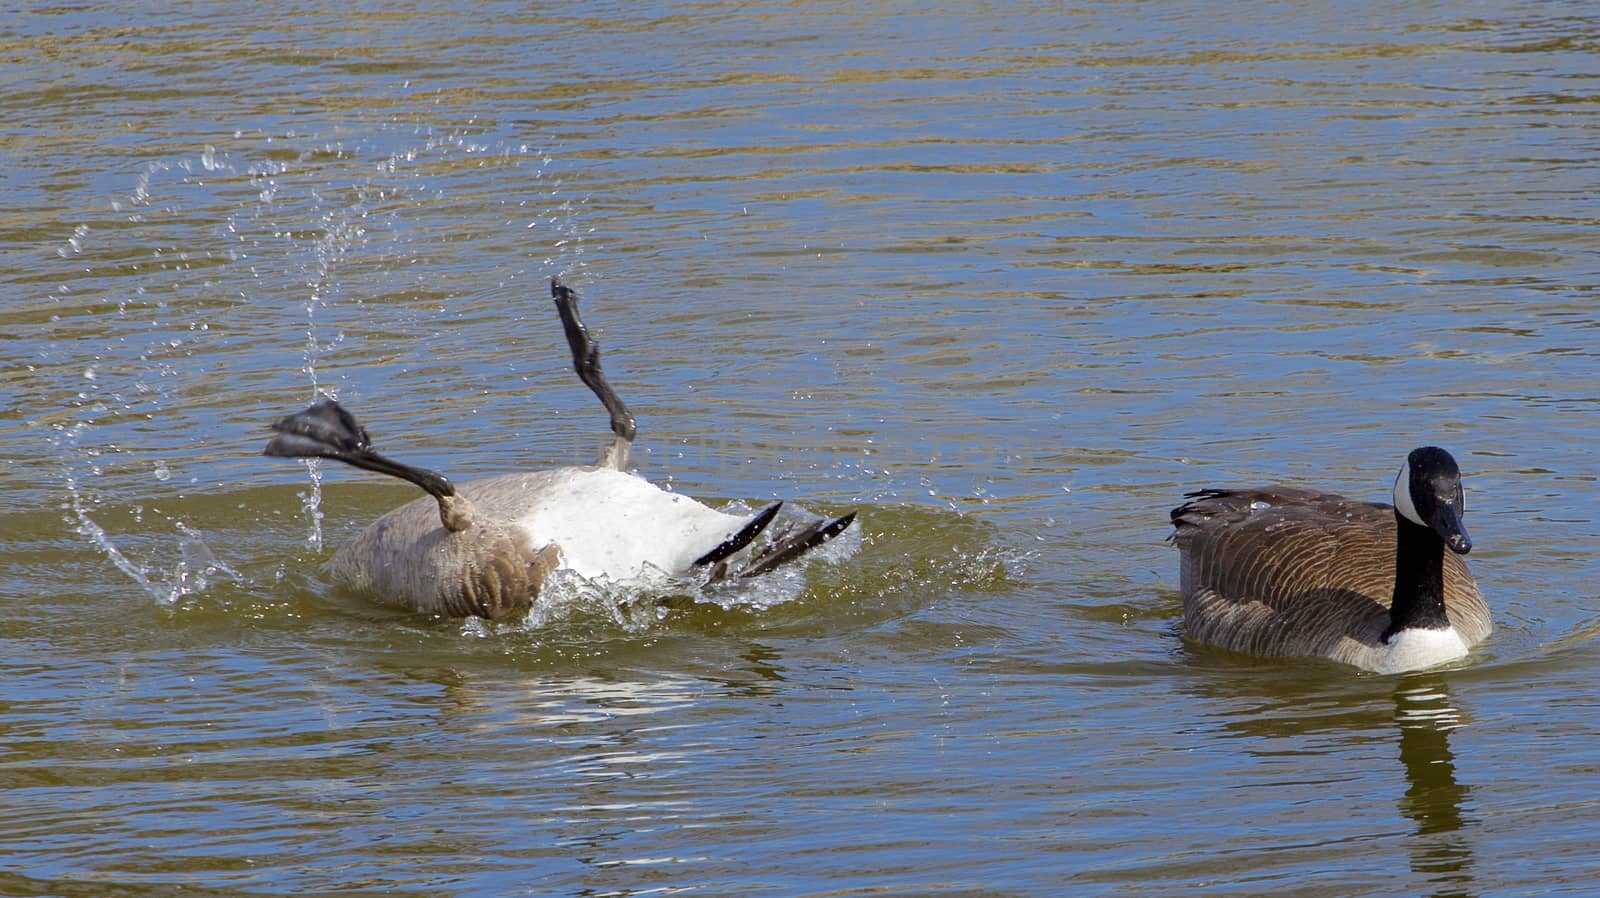 Expressive swim of two cacling geese